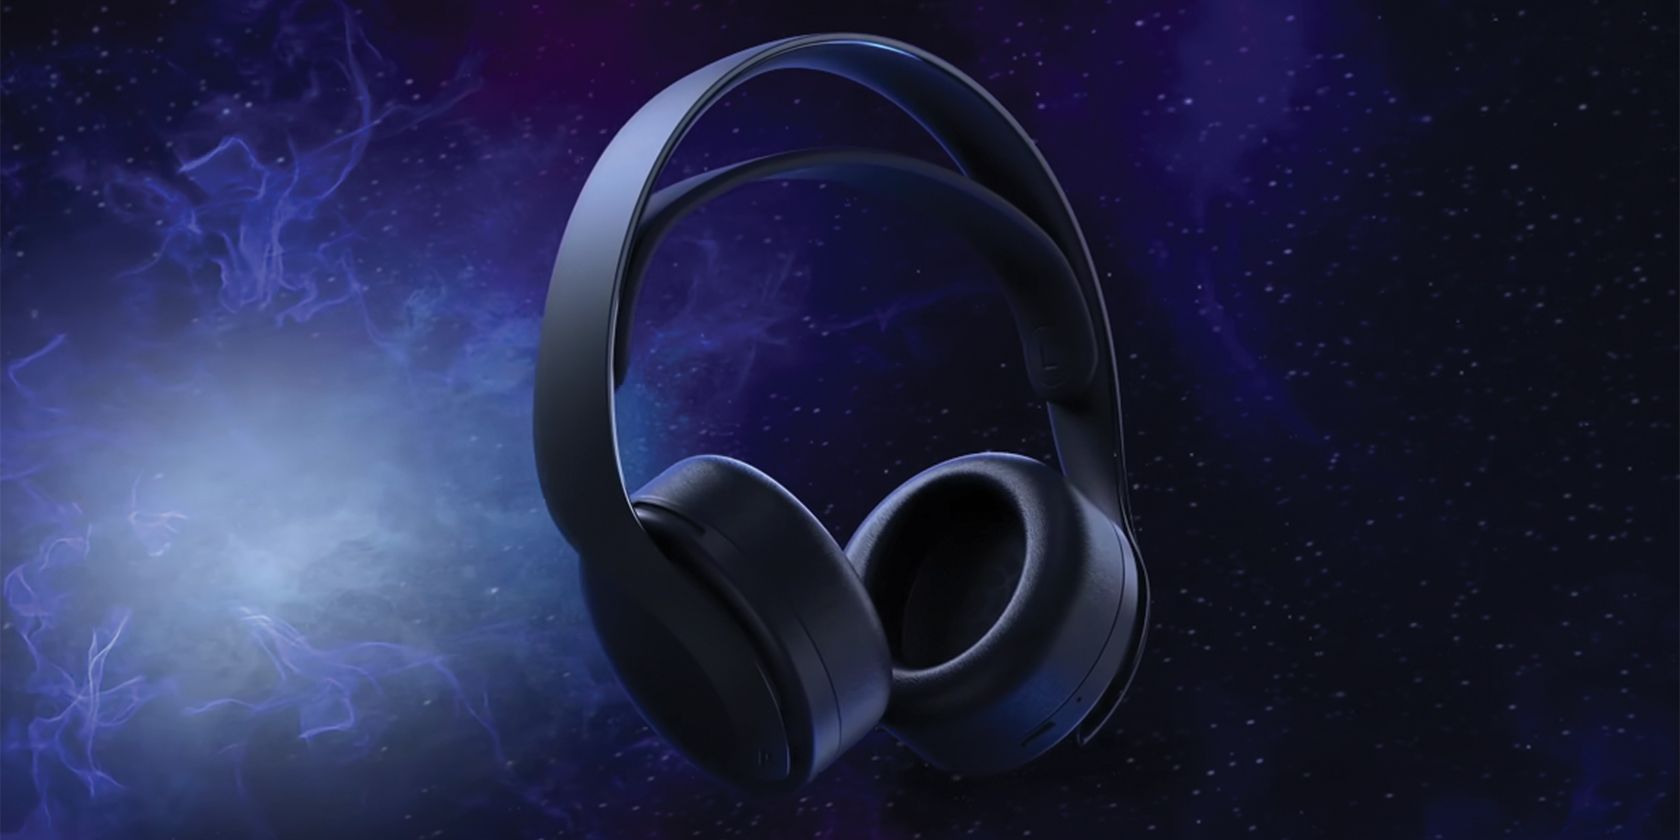 Is the PS5 Pulse 3D Wireless Headset Worth It?